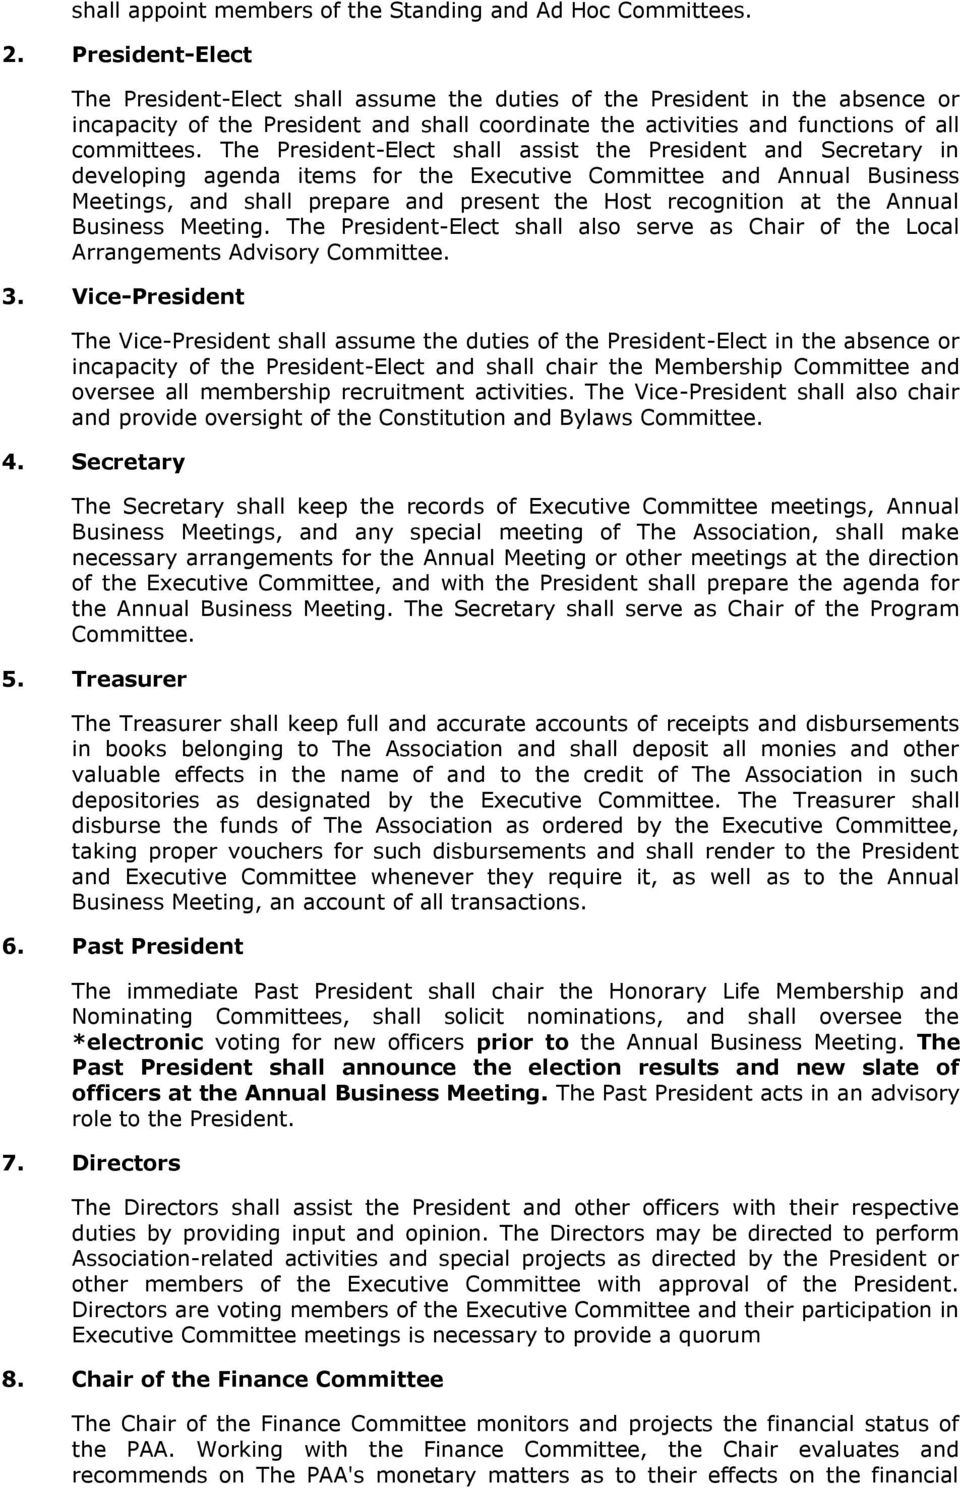 The President-Elect shall assist the President and Secretary in developing agenda items for the Executive Committee and Annual Business Meetings, and shall prepare and present the Host recognition at